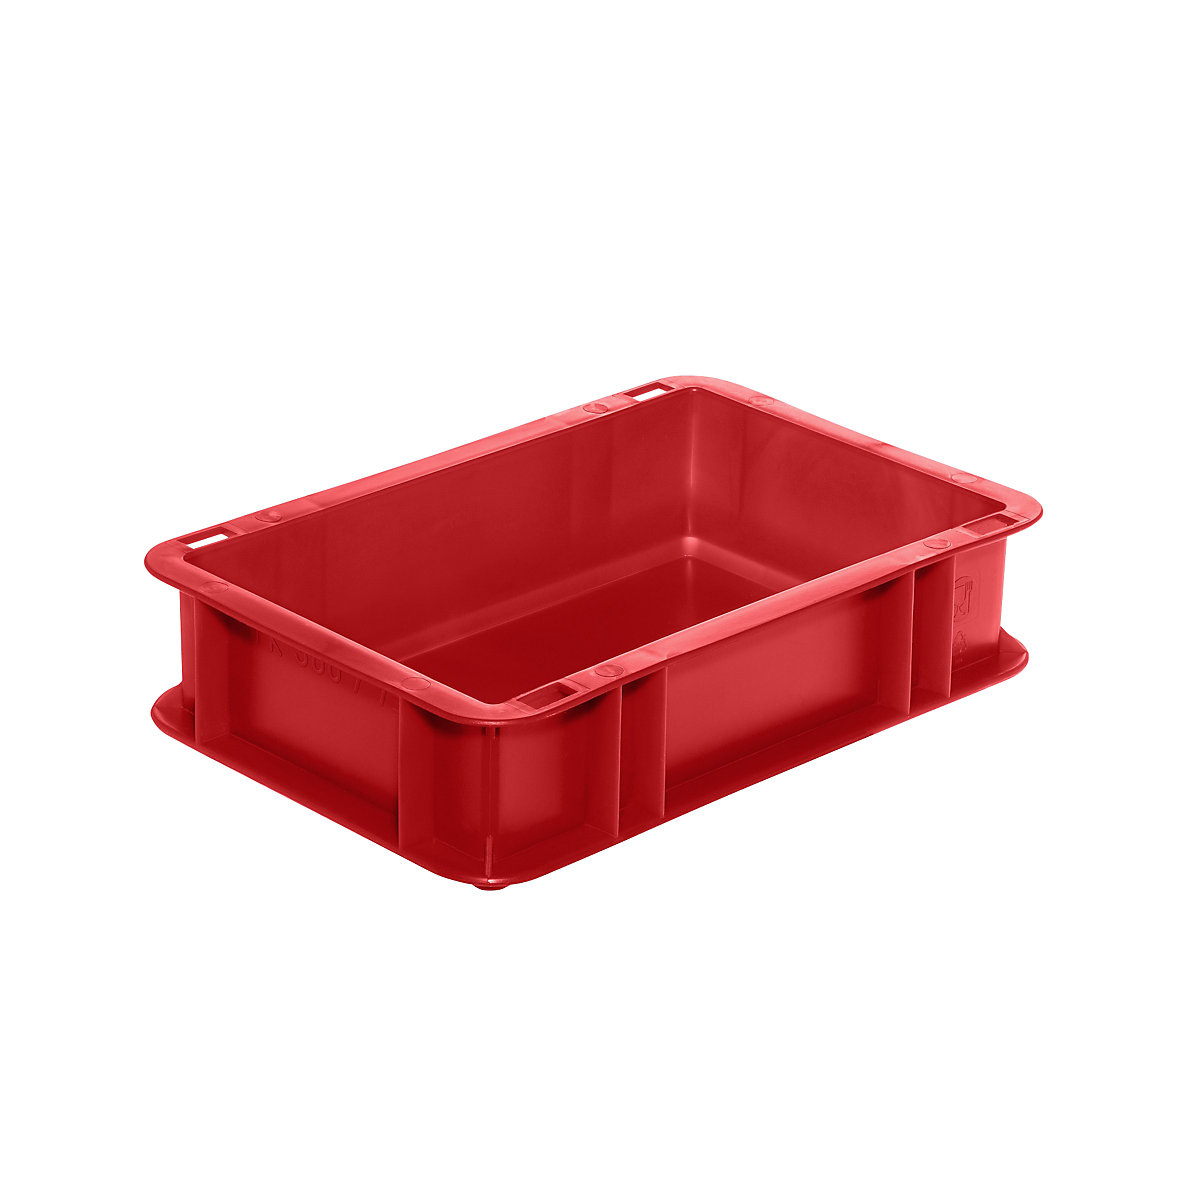 Euro stacking container, closed walls and base, LxWxH 300 x 200 x 75 mm, red, pack of 5